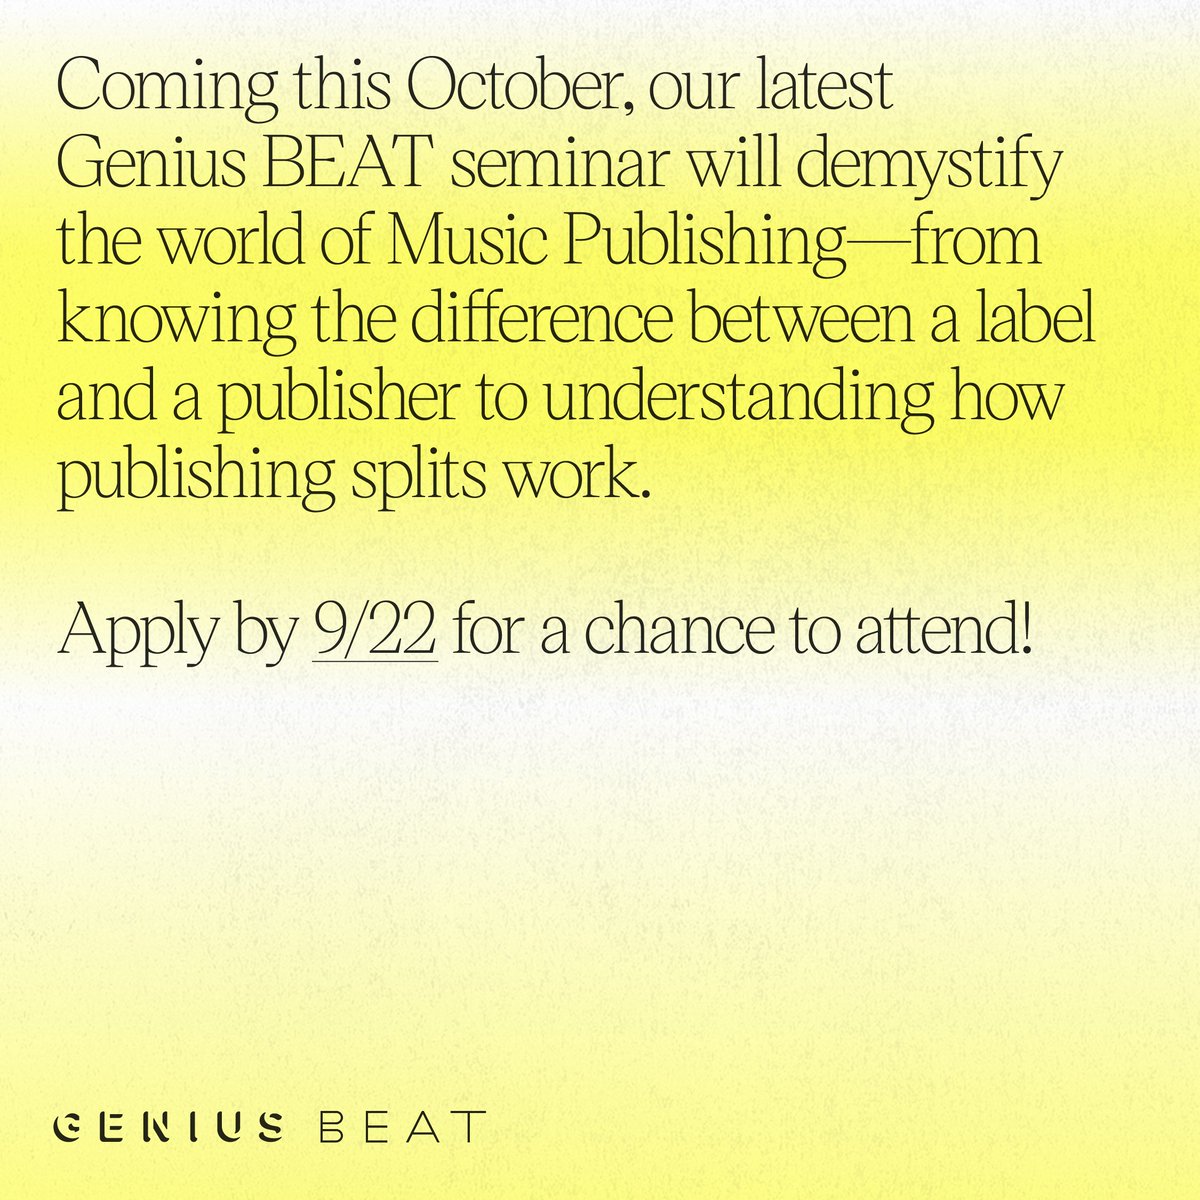 This October, we’re hosting a *free* Genius BEAT seminar to demystify all things Music Publishing. Apply here for a chance to attend (deadline 9/22)  → so.genius.com/oLd8SGR #geniusBEAT